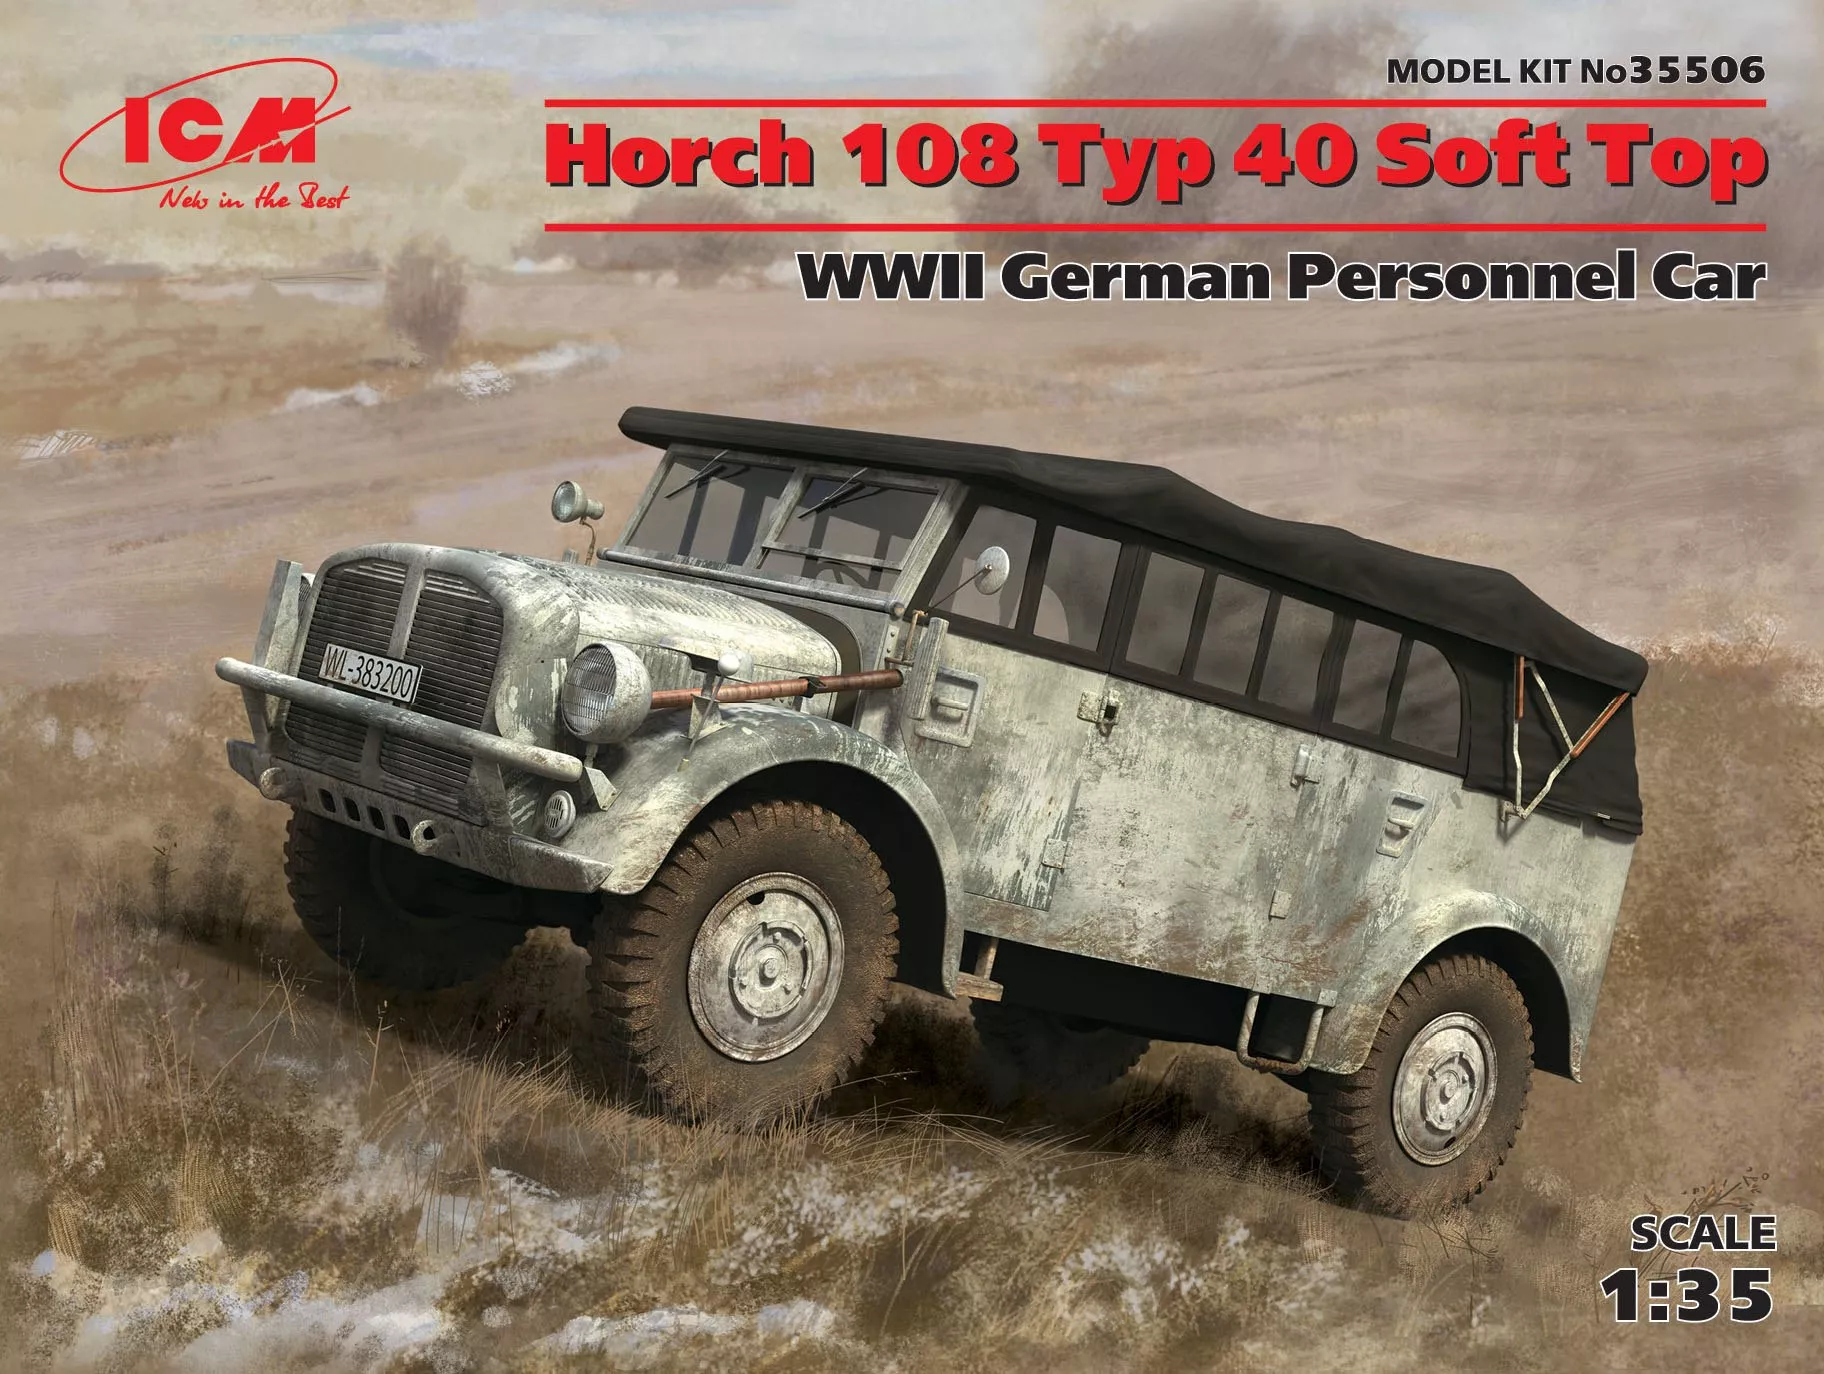 ICM - Horch 108 Typ 40 Soft Top, WWII German Personnel Car